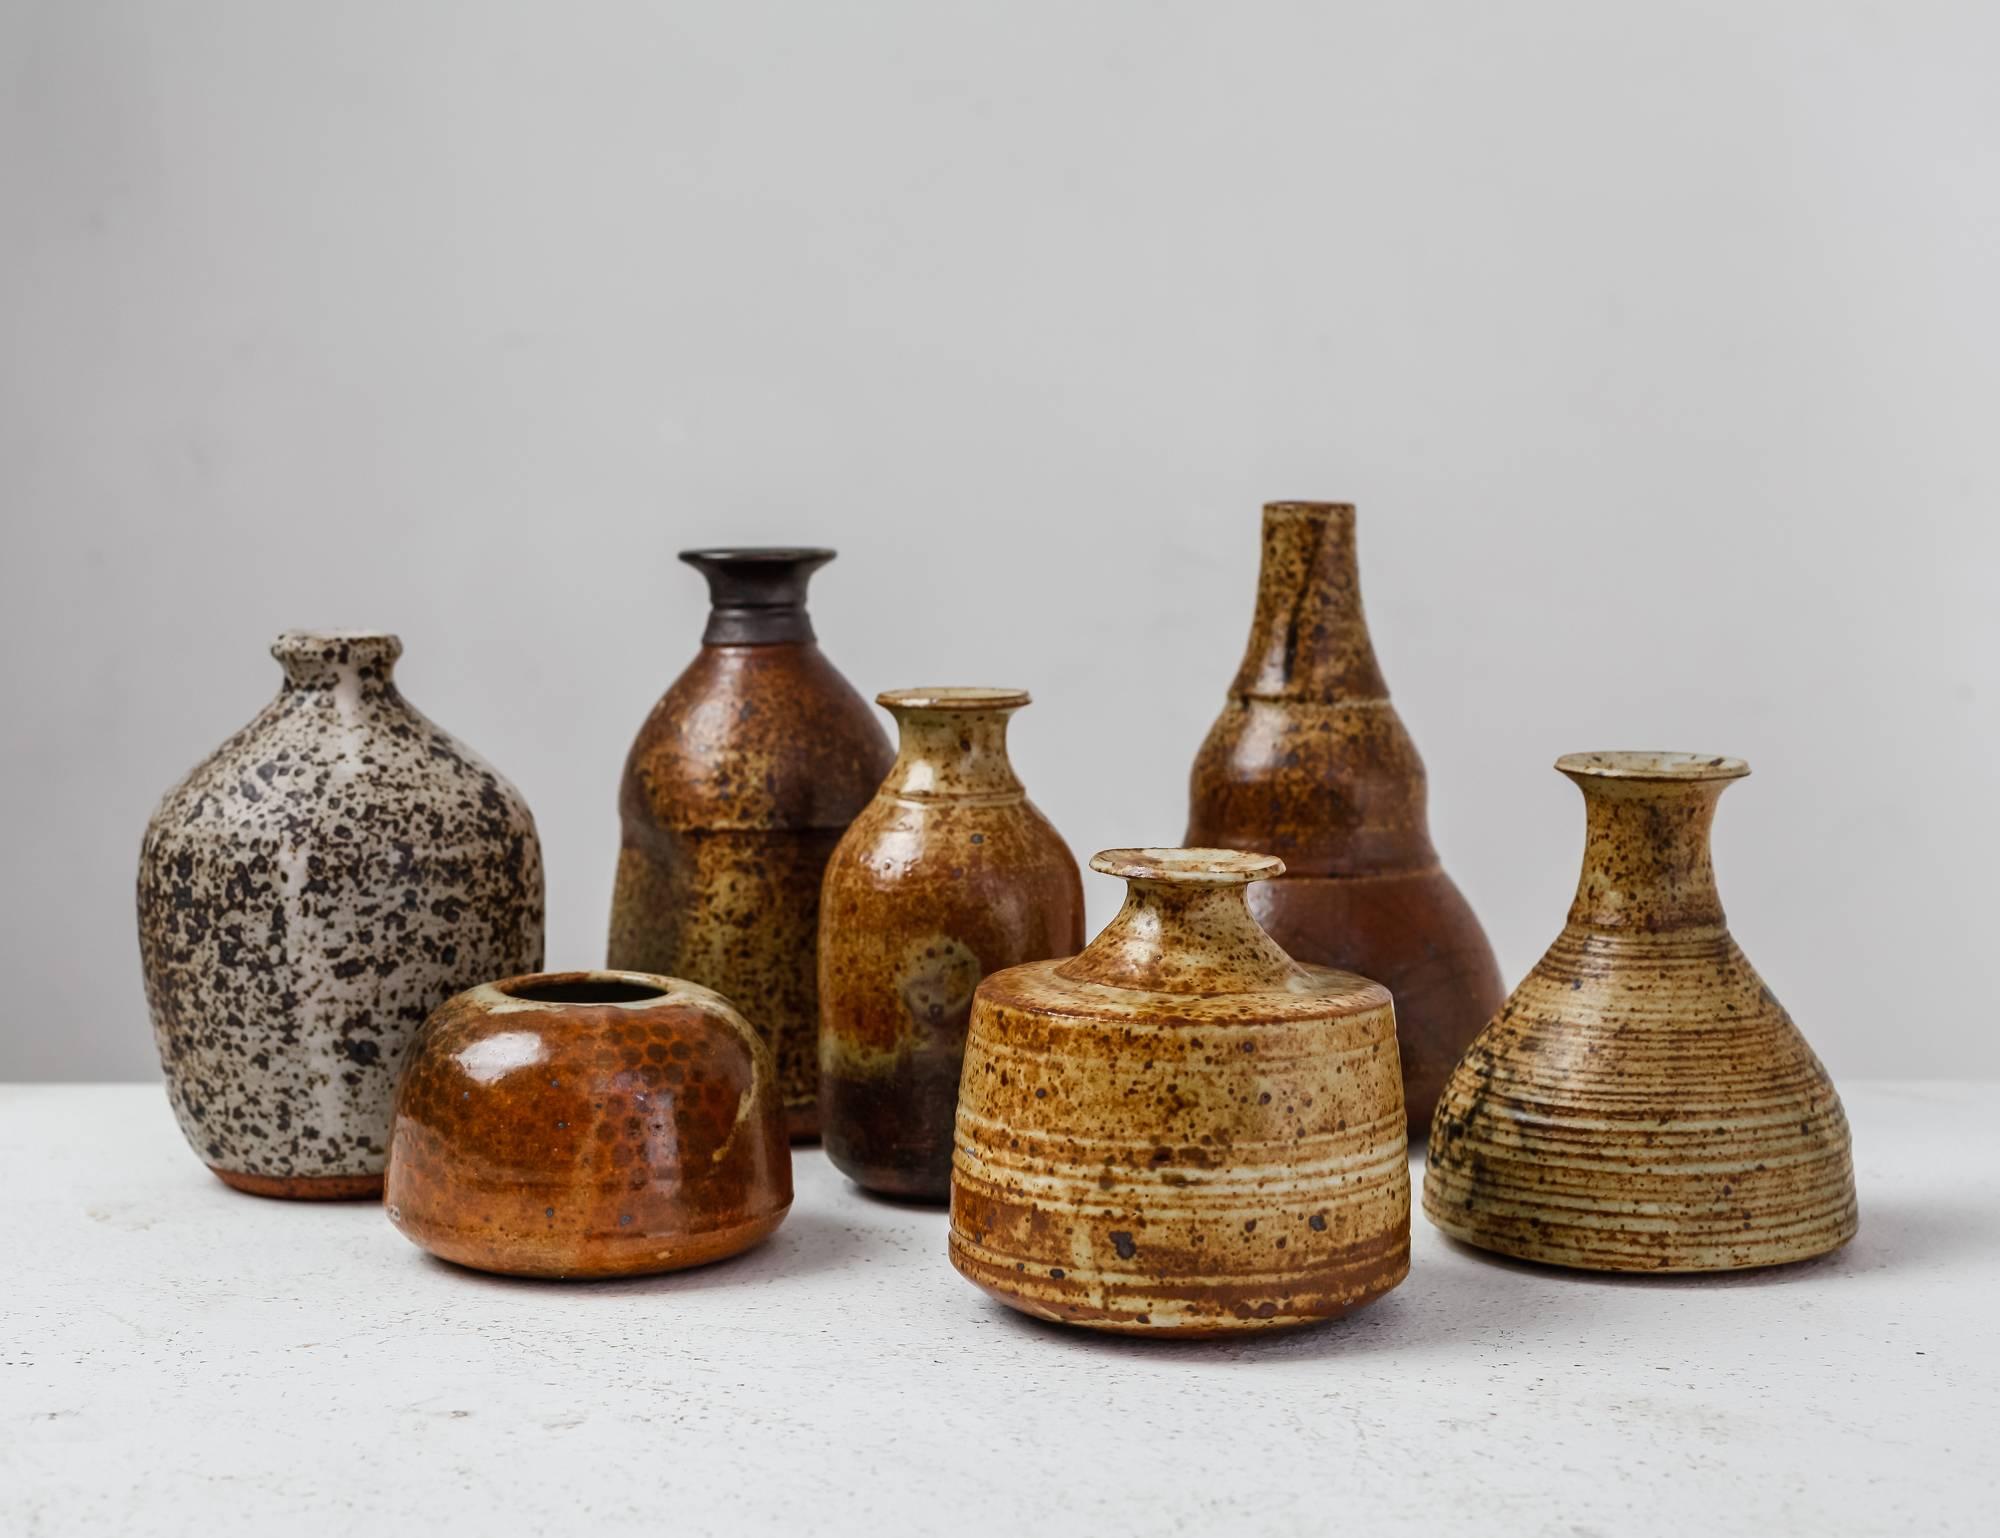 A set of seven vases with a brown and earth tone glaze finish, by French ceramist Franco Agnese. 
Measures: The lowest piece is 6.5 cm (2.5 inch) high and has a 9 cm (3.5 inch) diameter. The tallest vase is 16.5 cm (6.5 inch) high with a 10.5 cm (4